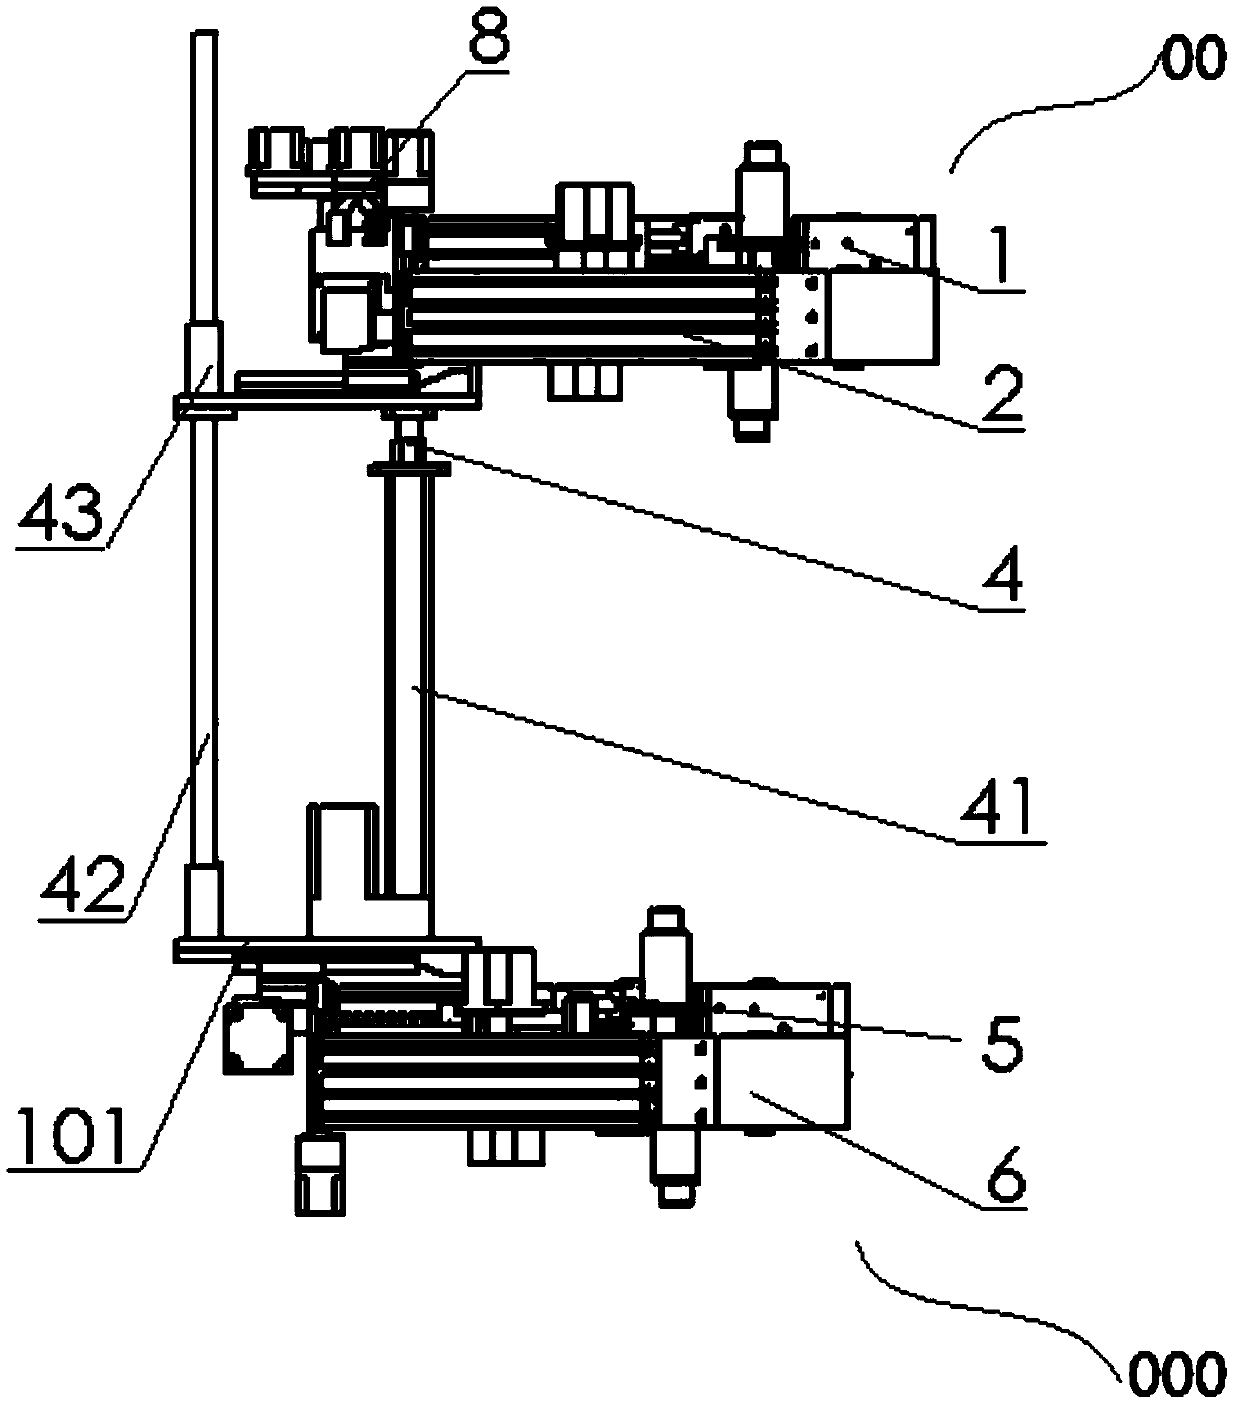 Clamping mechanisms of robot used for transmission tower and climbing robot